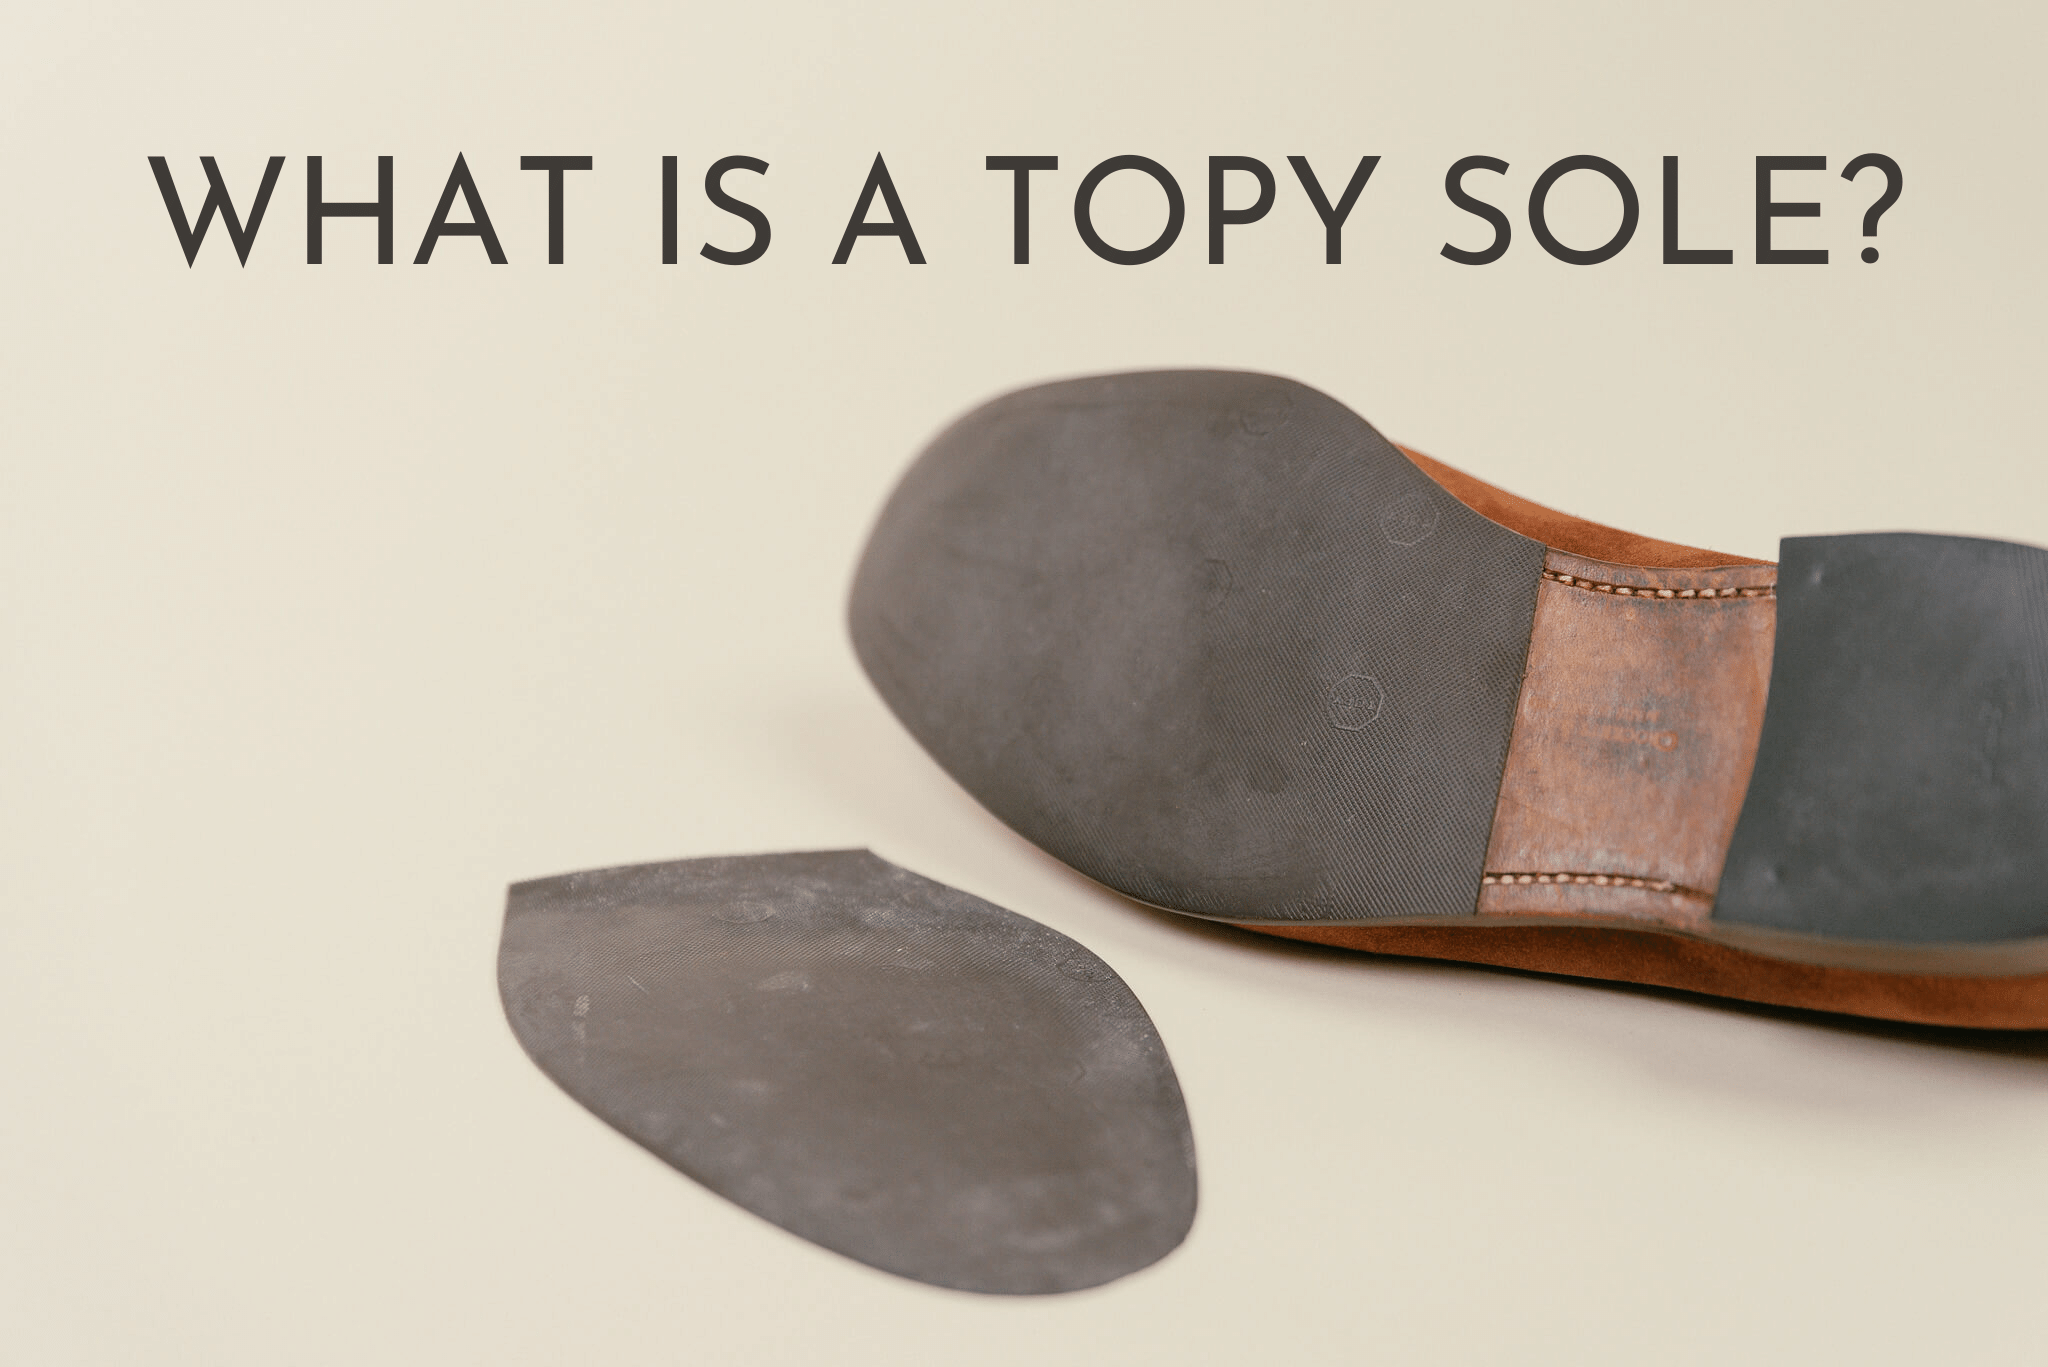 Sole Protectors: Adding Half Rubber Soles (TOPYs) To Your Shoes